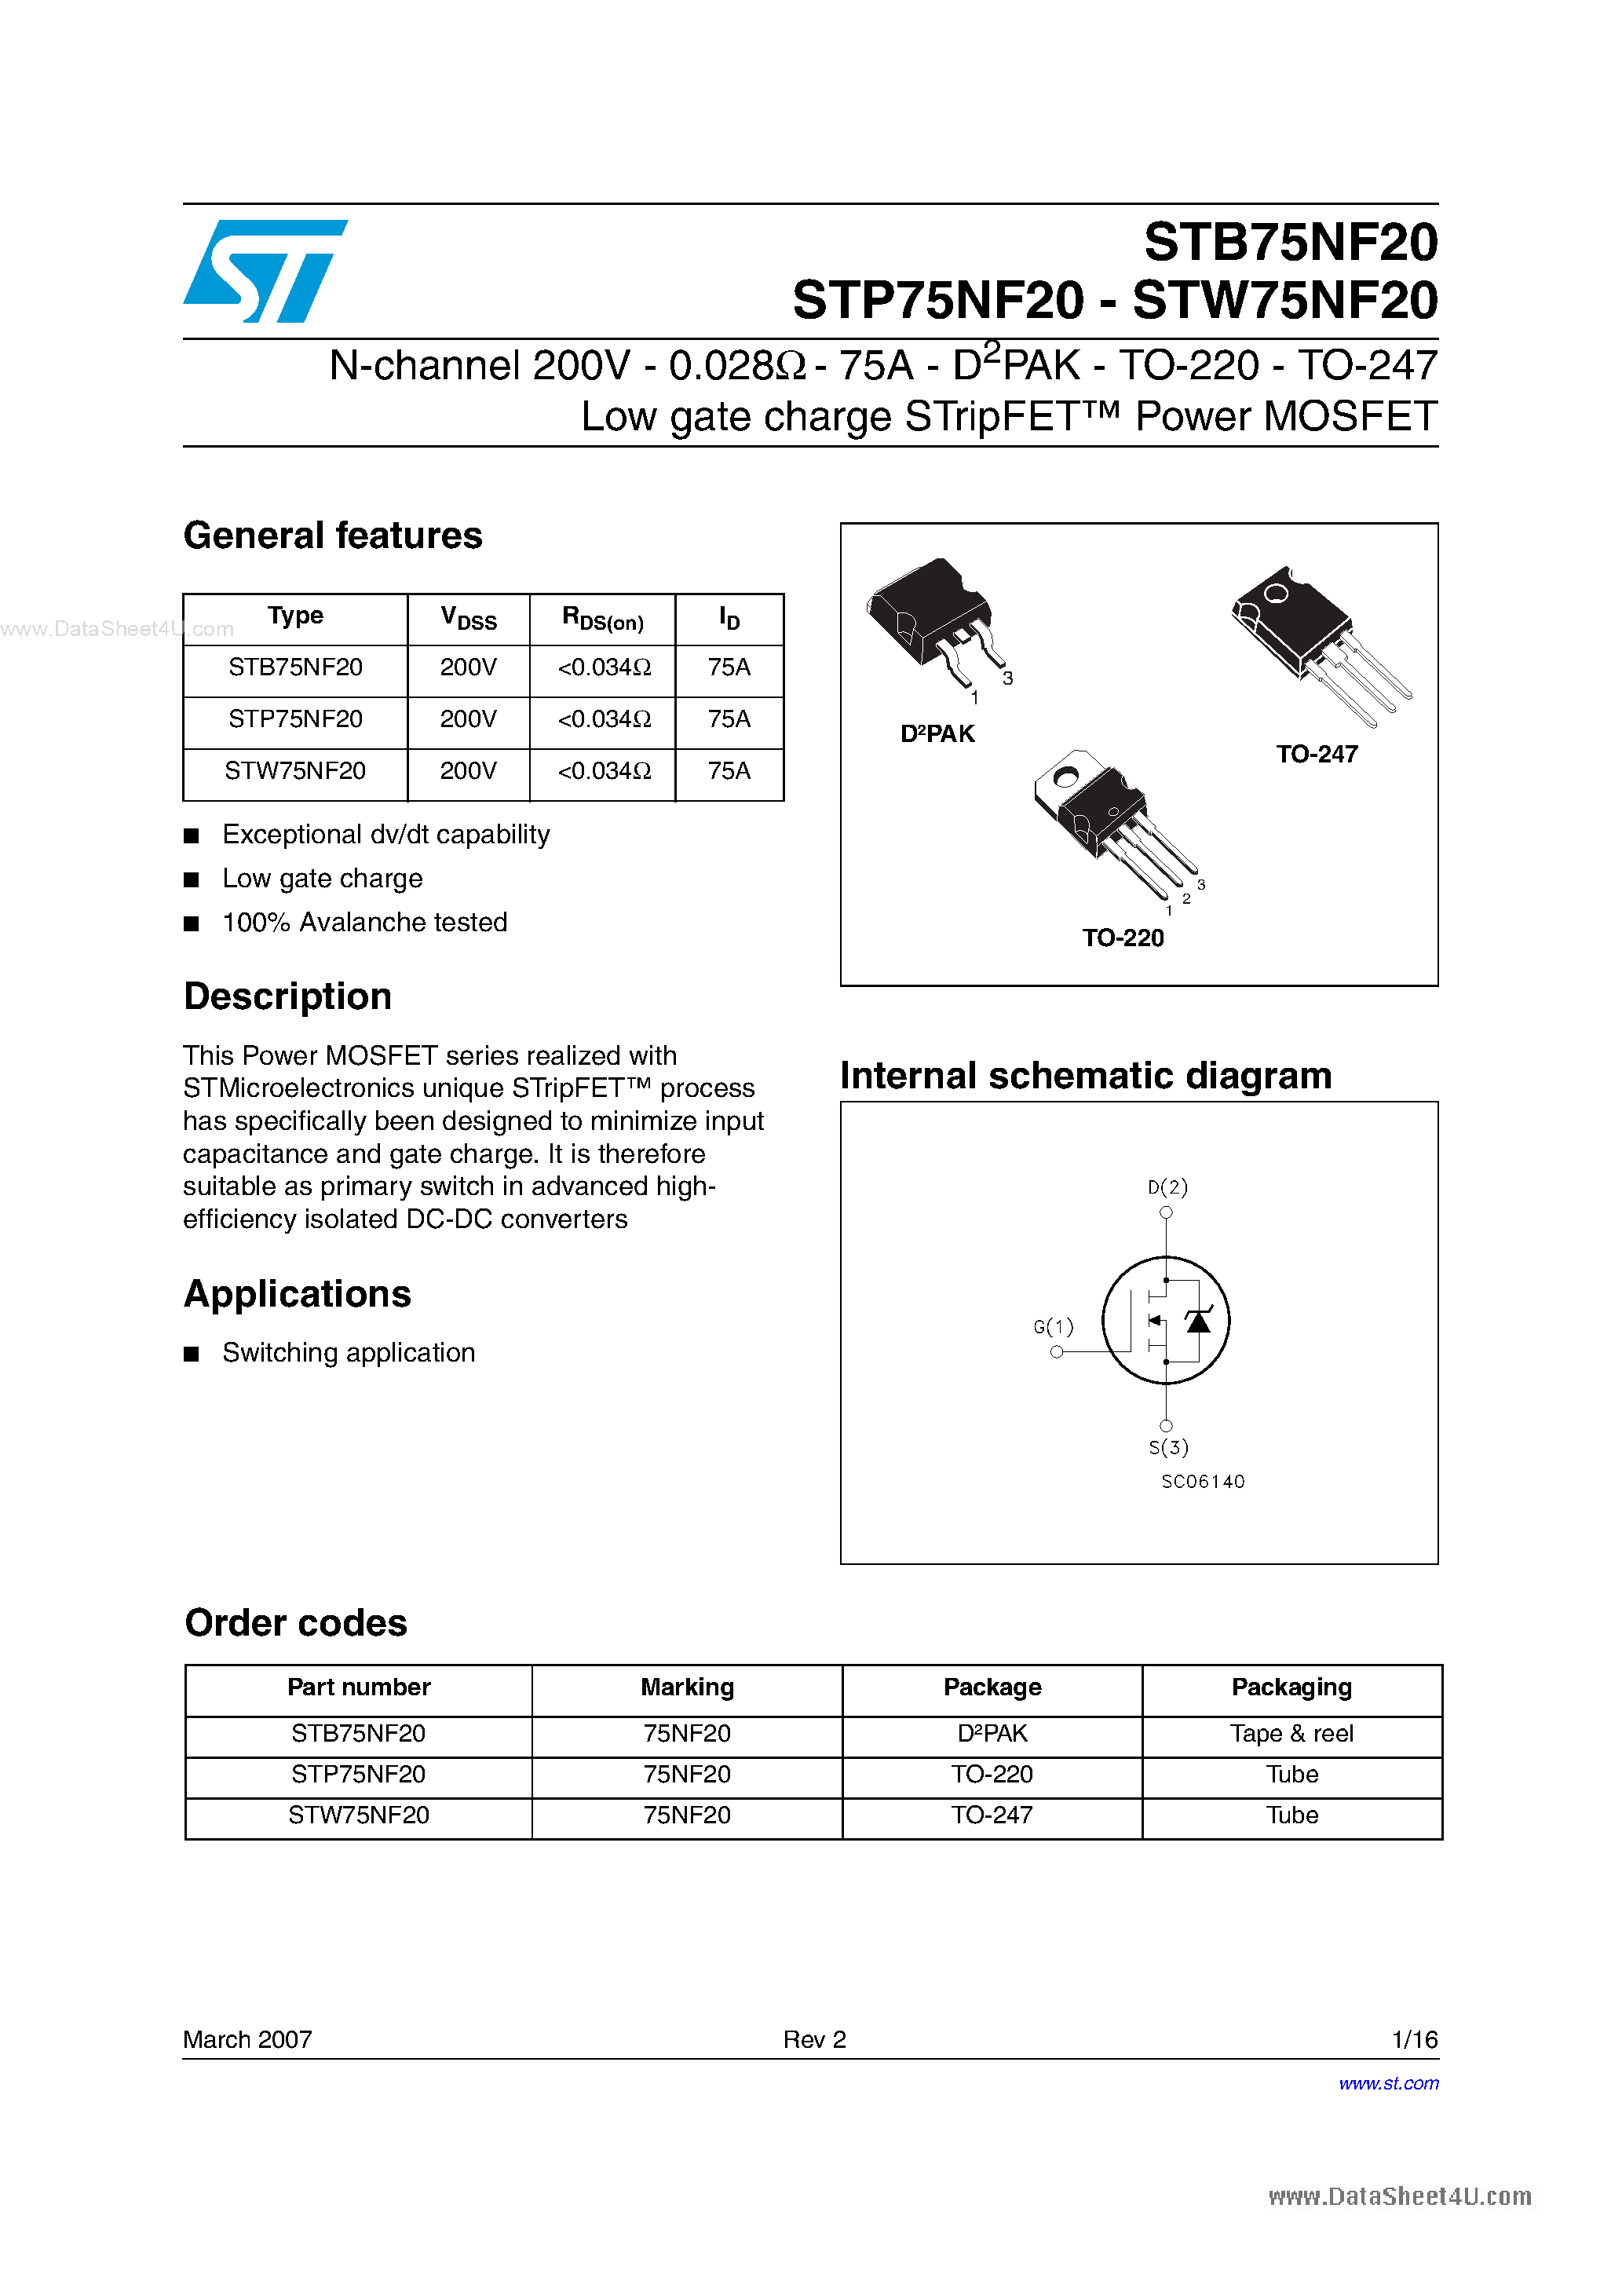 Даташит STB75NF20 - N-channel Power MOSFET страница 1